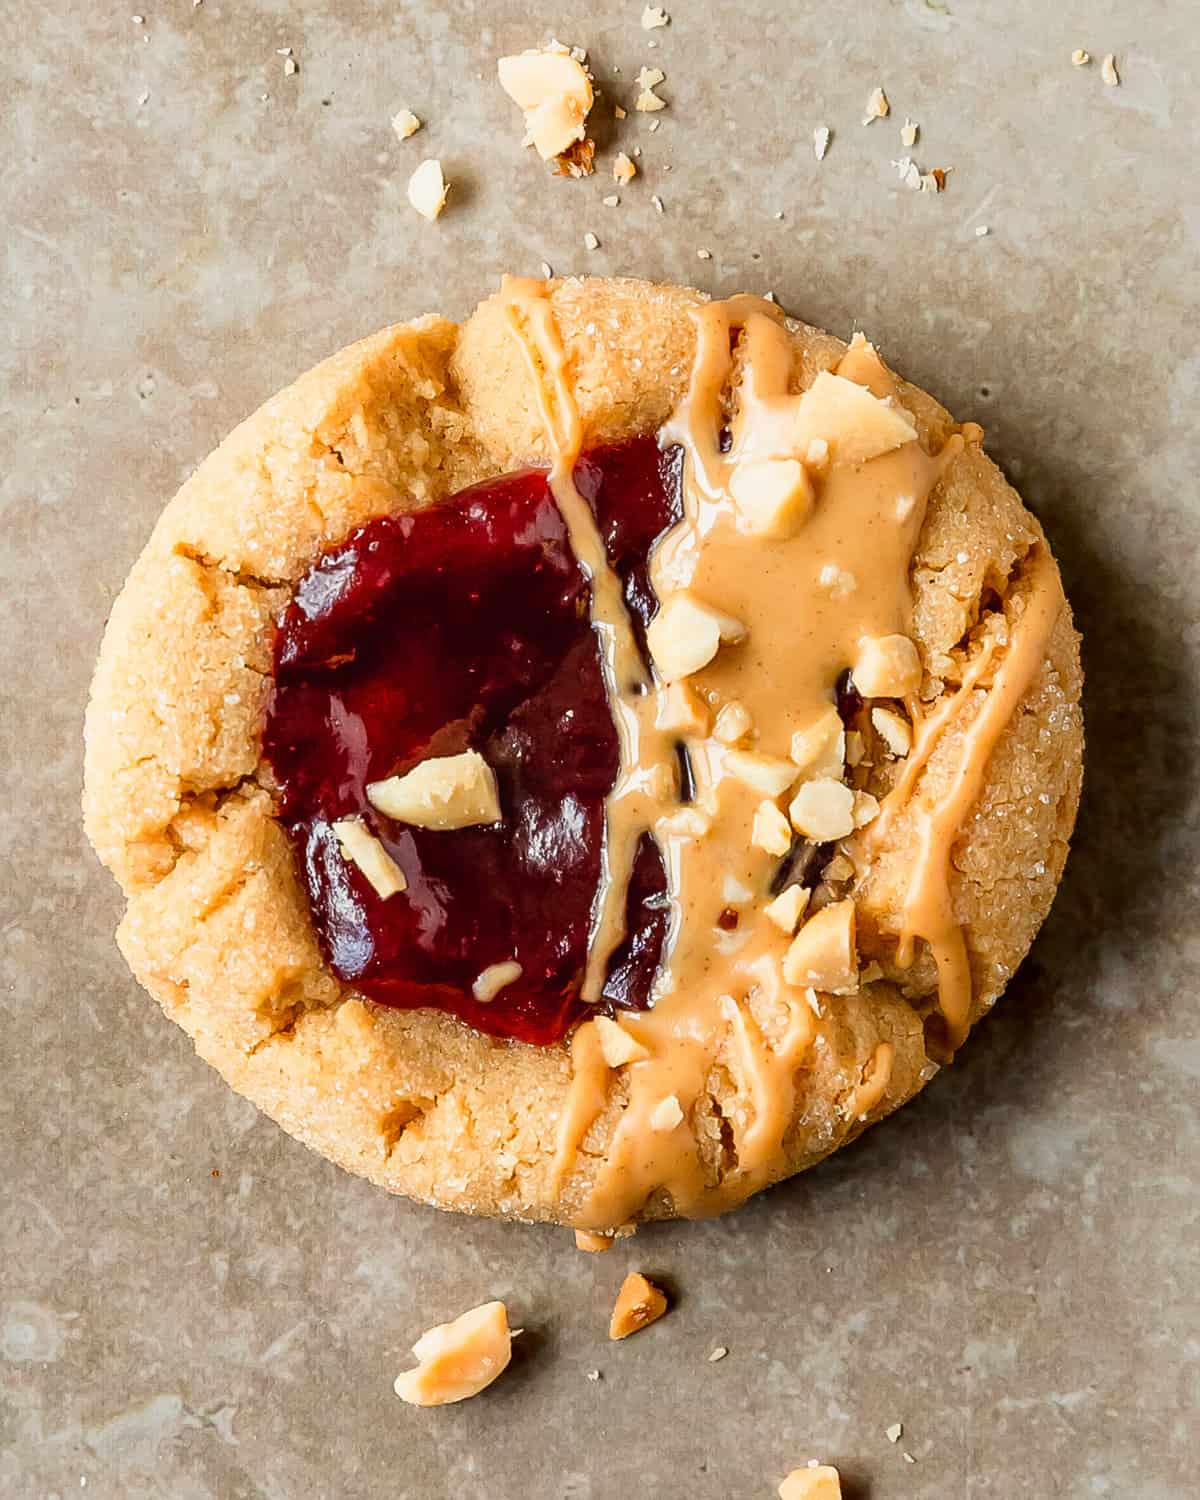 Peanut butter and jelly cookies are soft and chewy peanut butter cookies, rolled in a crunchy sugar coating, with a strawberry jam filled center. Top these easy to make peanut butter jelly cookies with a dollop of more jelly, a drizzle of PB and chopped peanuts after baking. These pb and j cookies are just like the classic sandwich in cookie form.